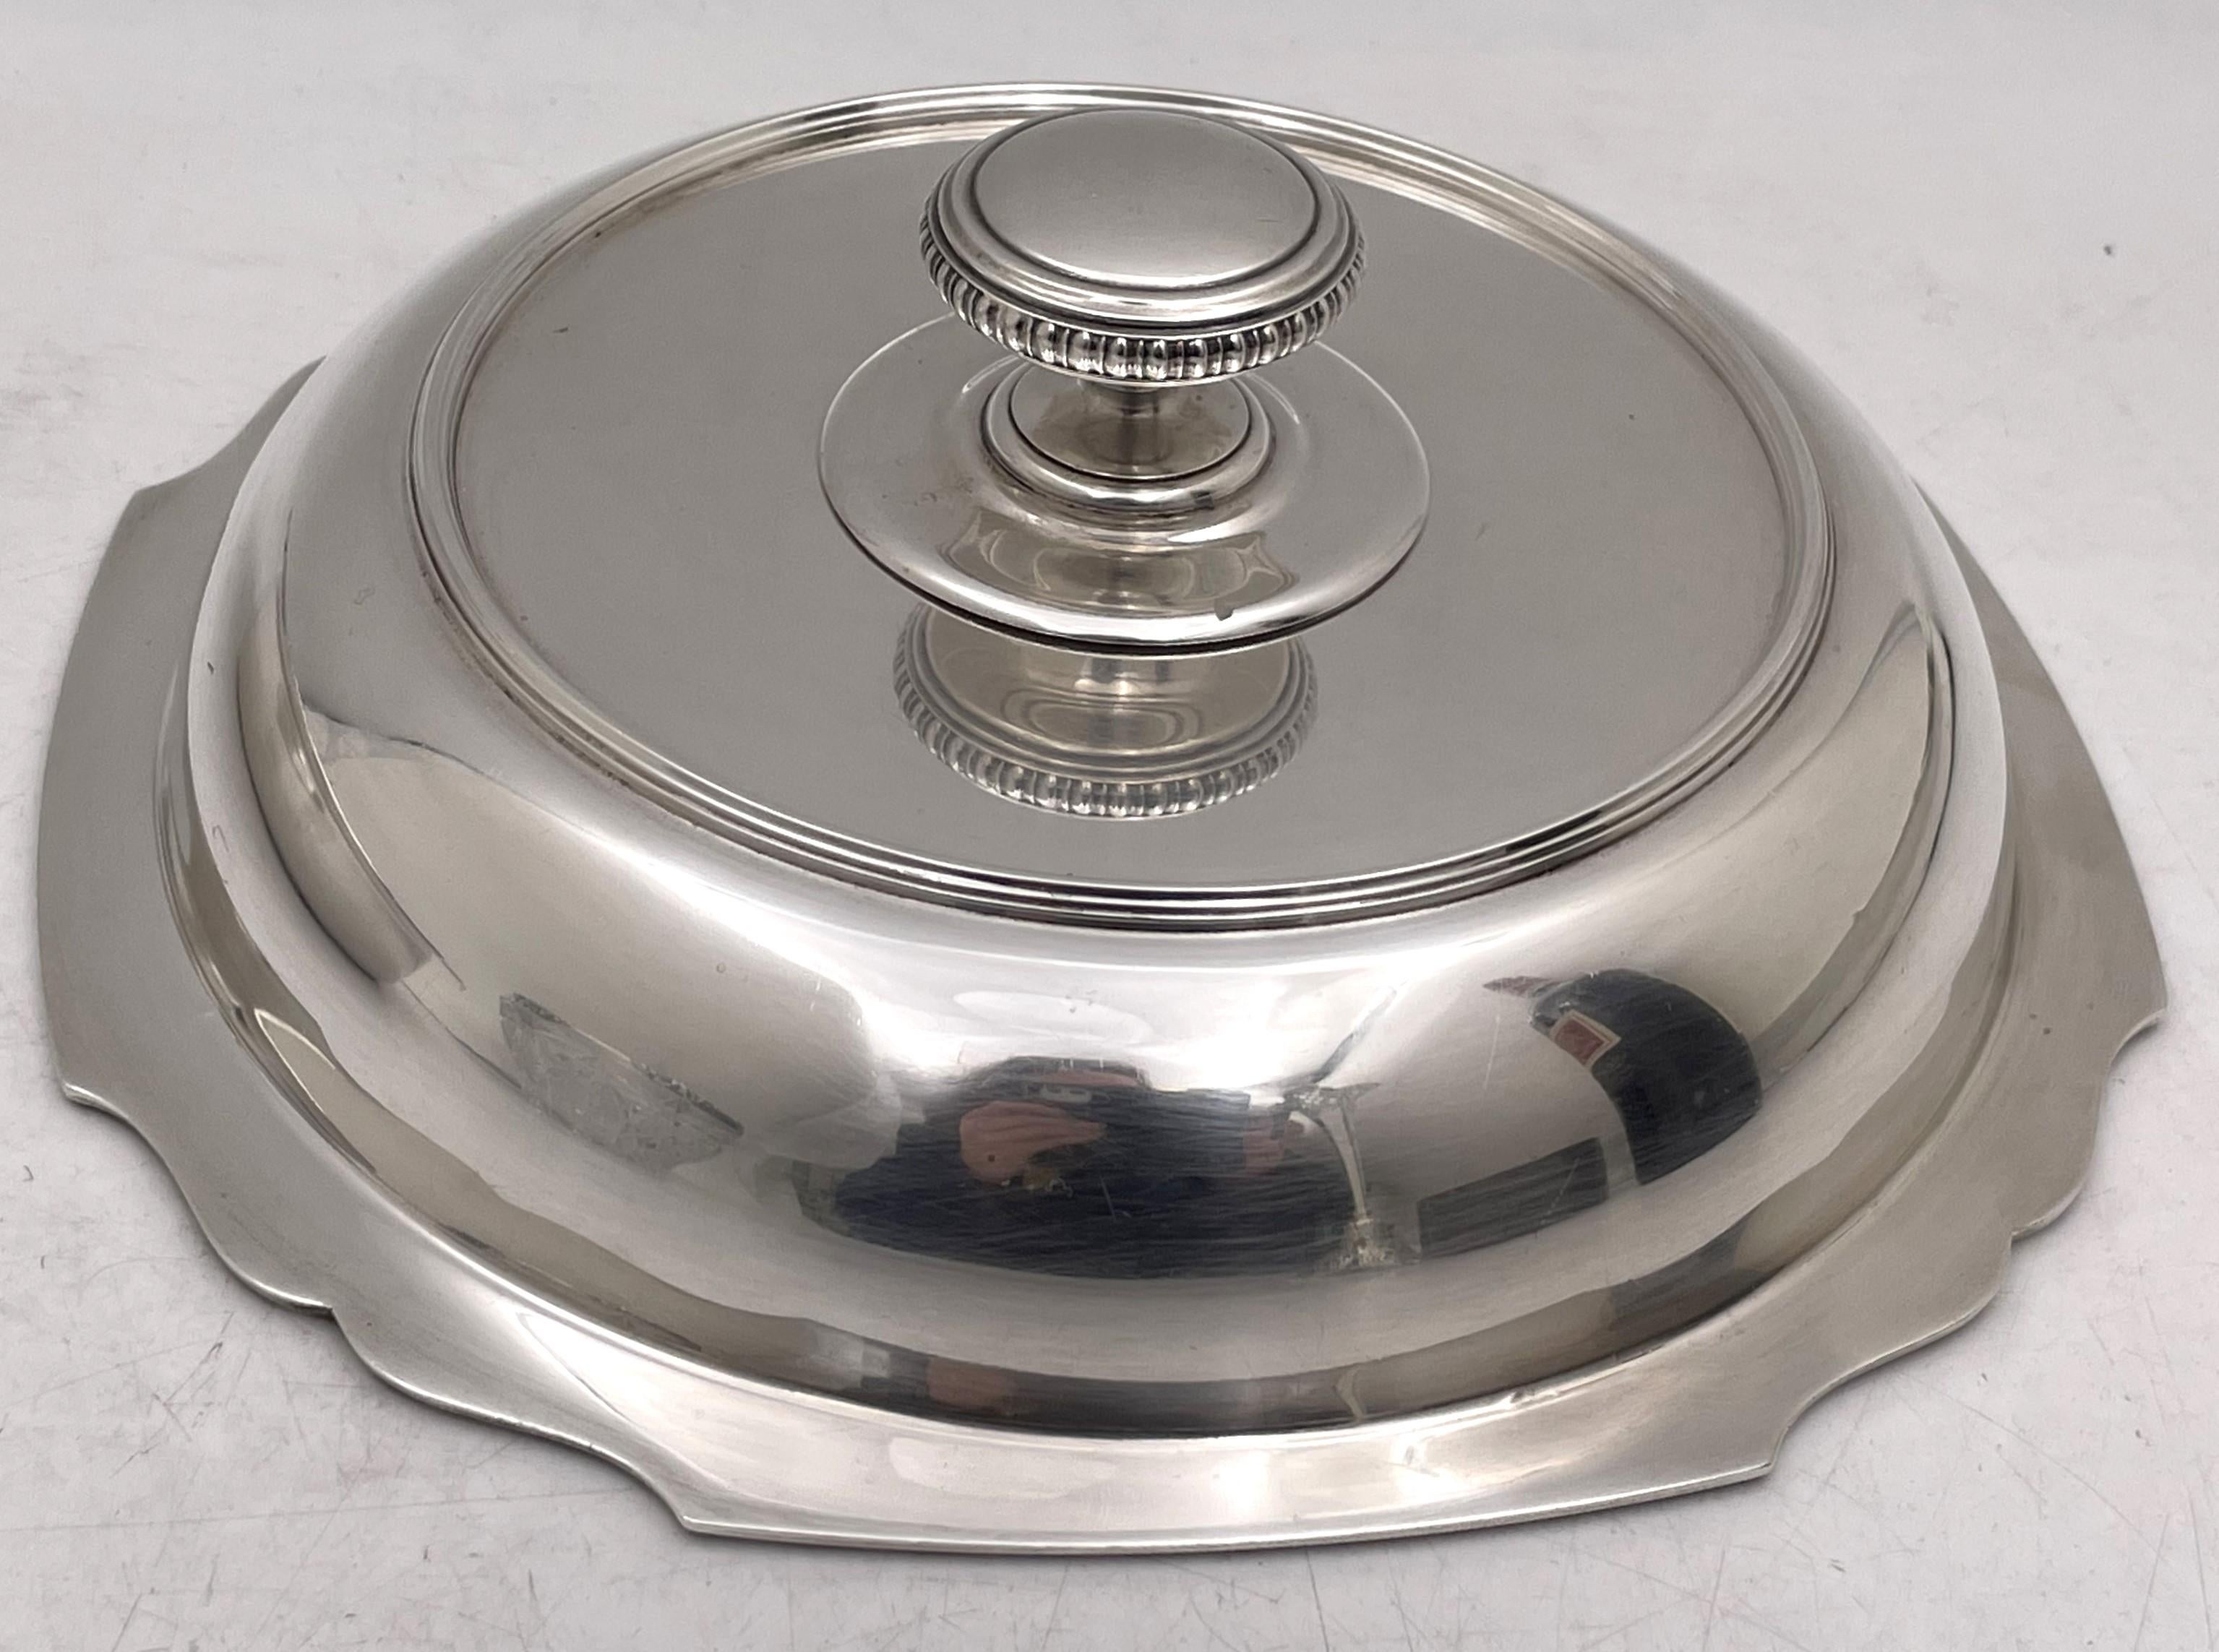 Tiffany & Co. Sterling Silver 1926 Covered Vegetable Dish Pair of Bowls Art Deco For Sale 1